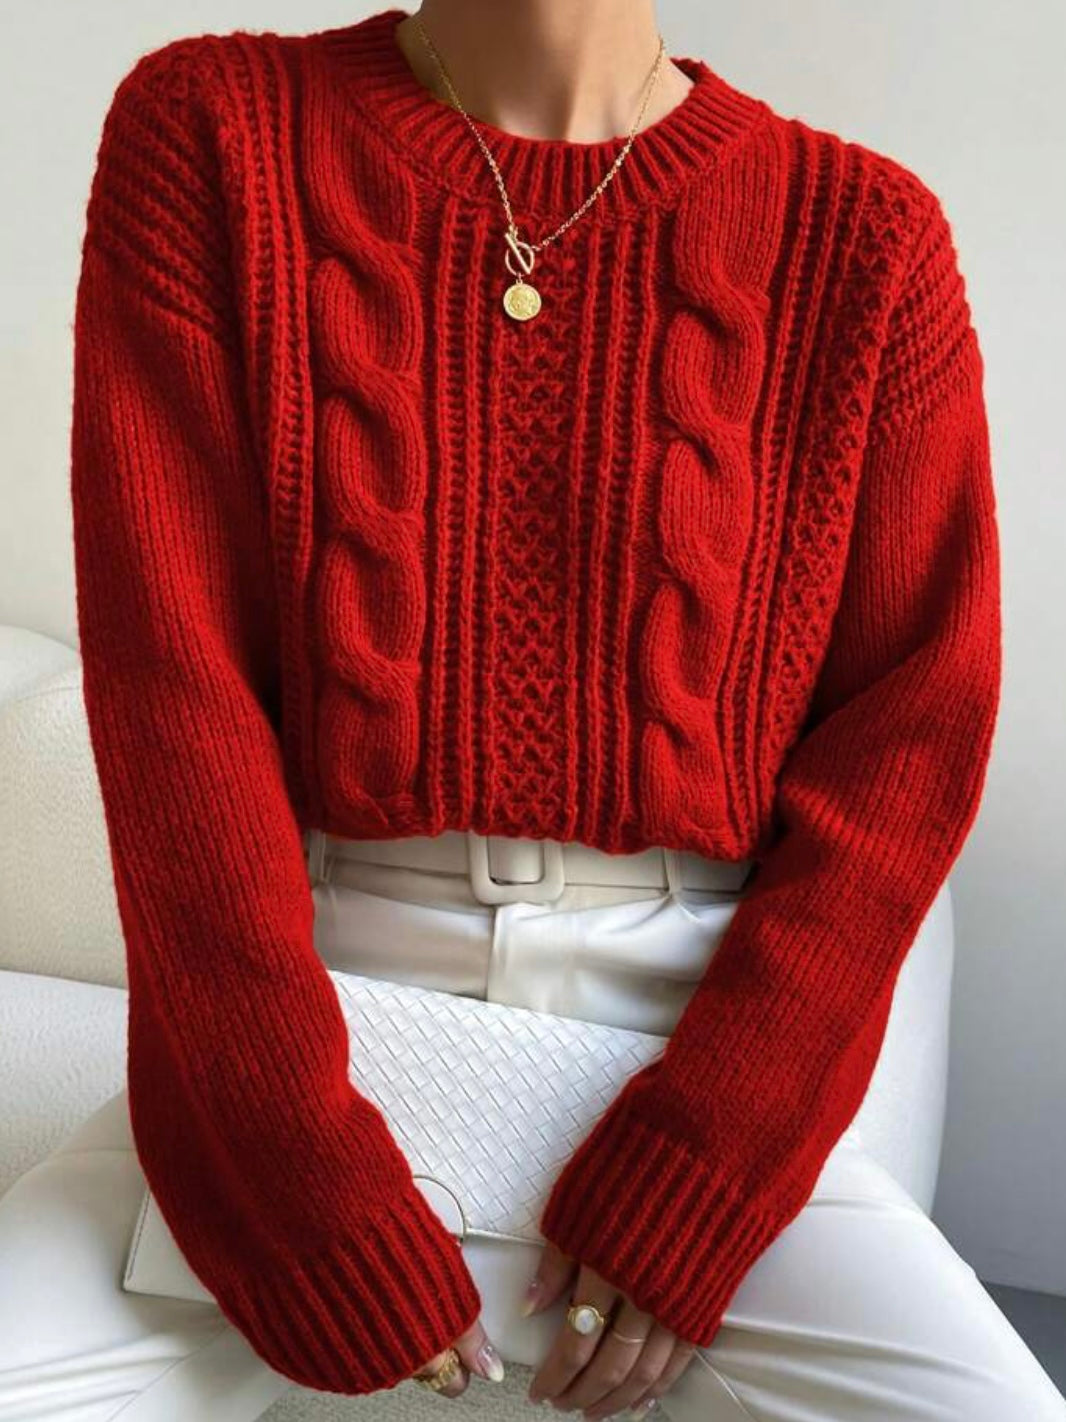 Red knitted sweater